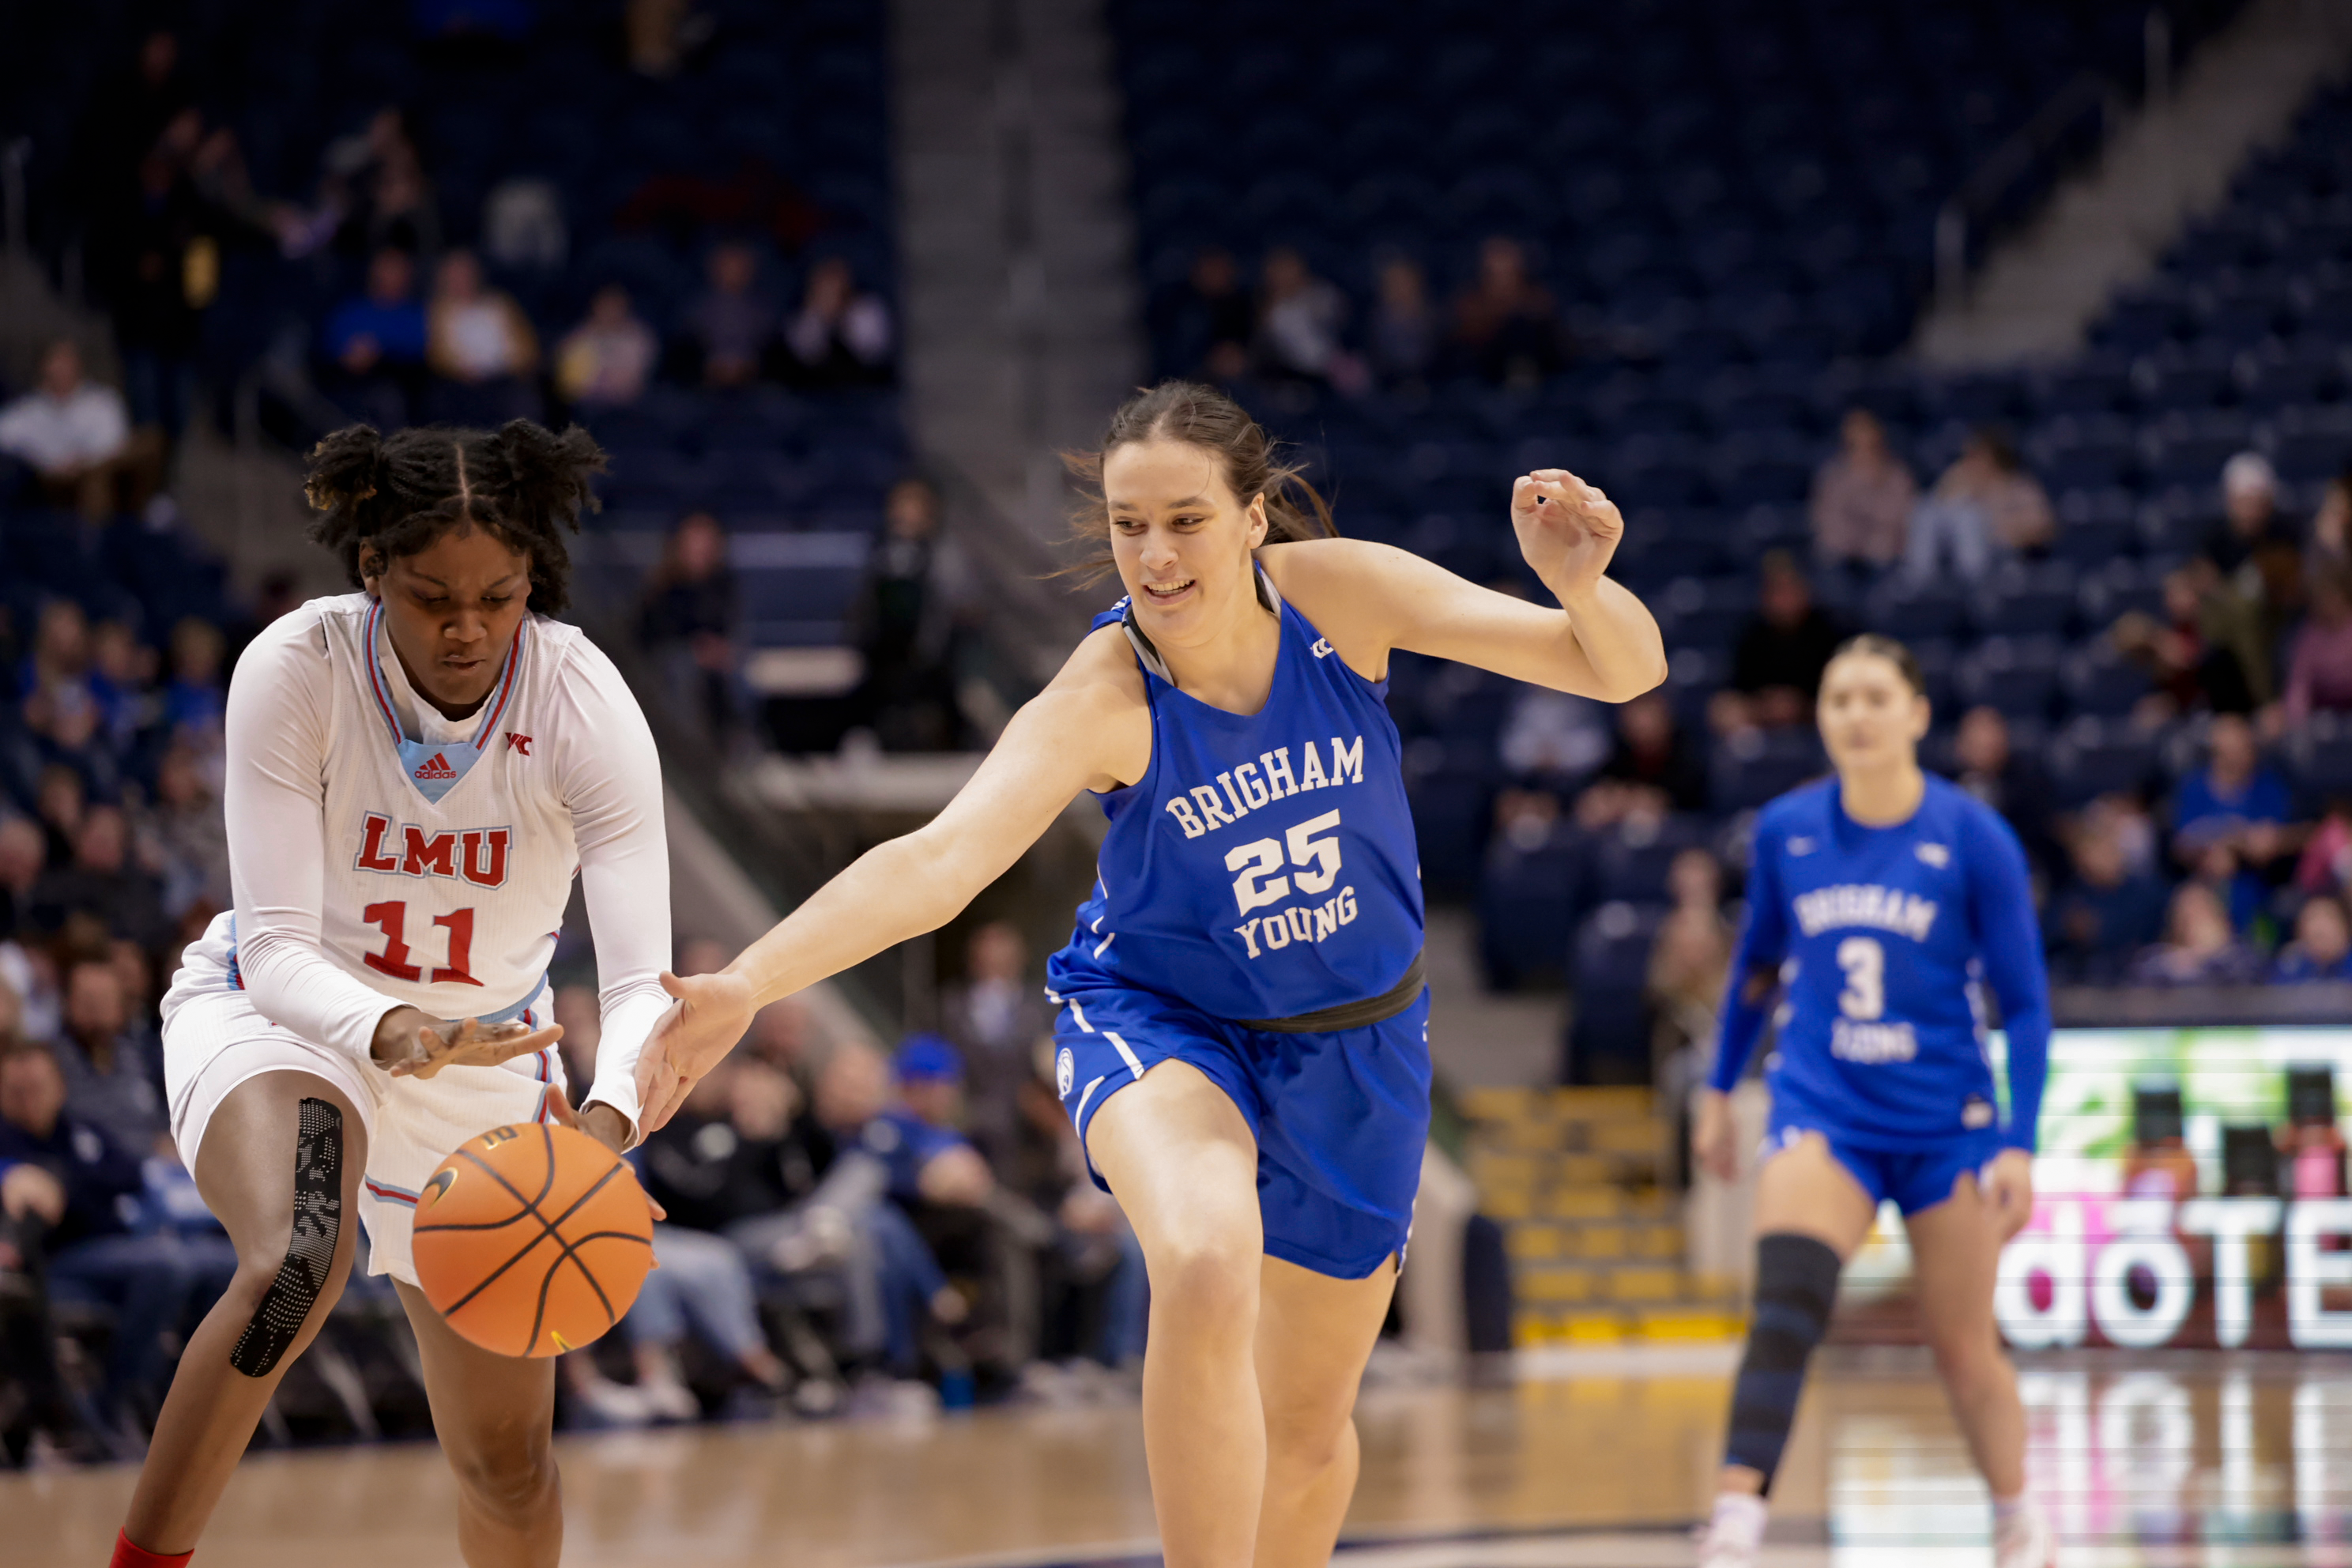 Emma Calvart gets a steal during a win over LMU at the Marriott Center.